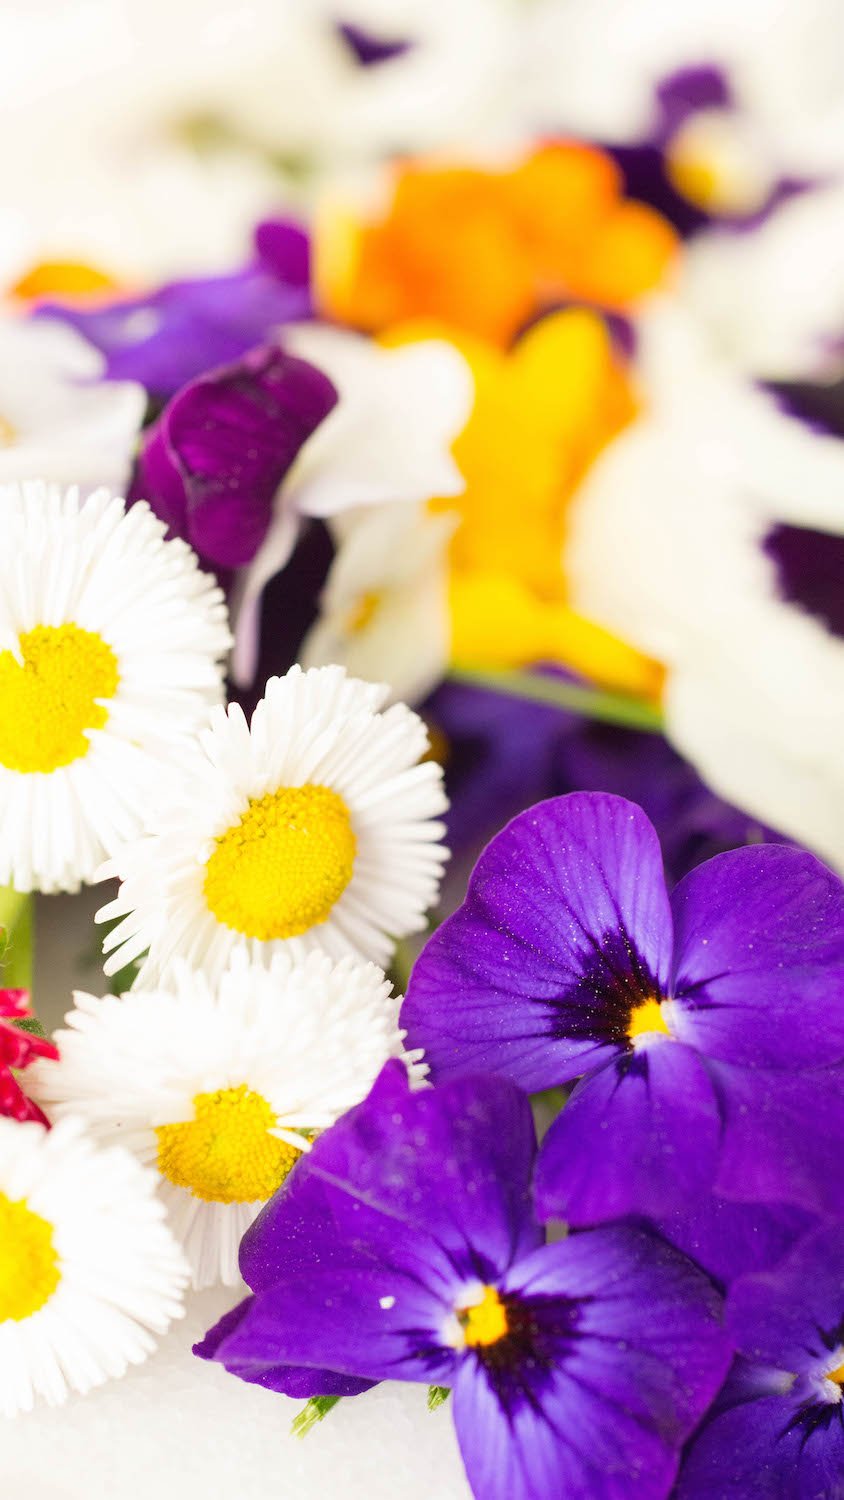 A close up of an assortment of colorful edible flowers